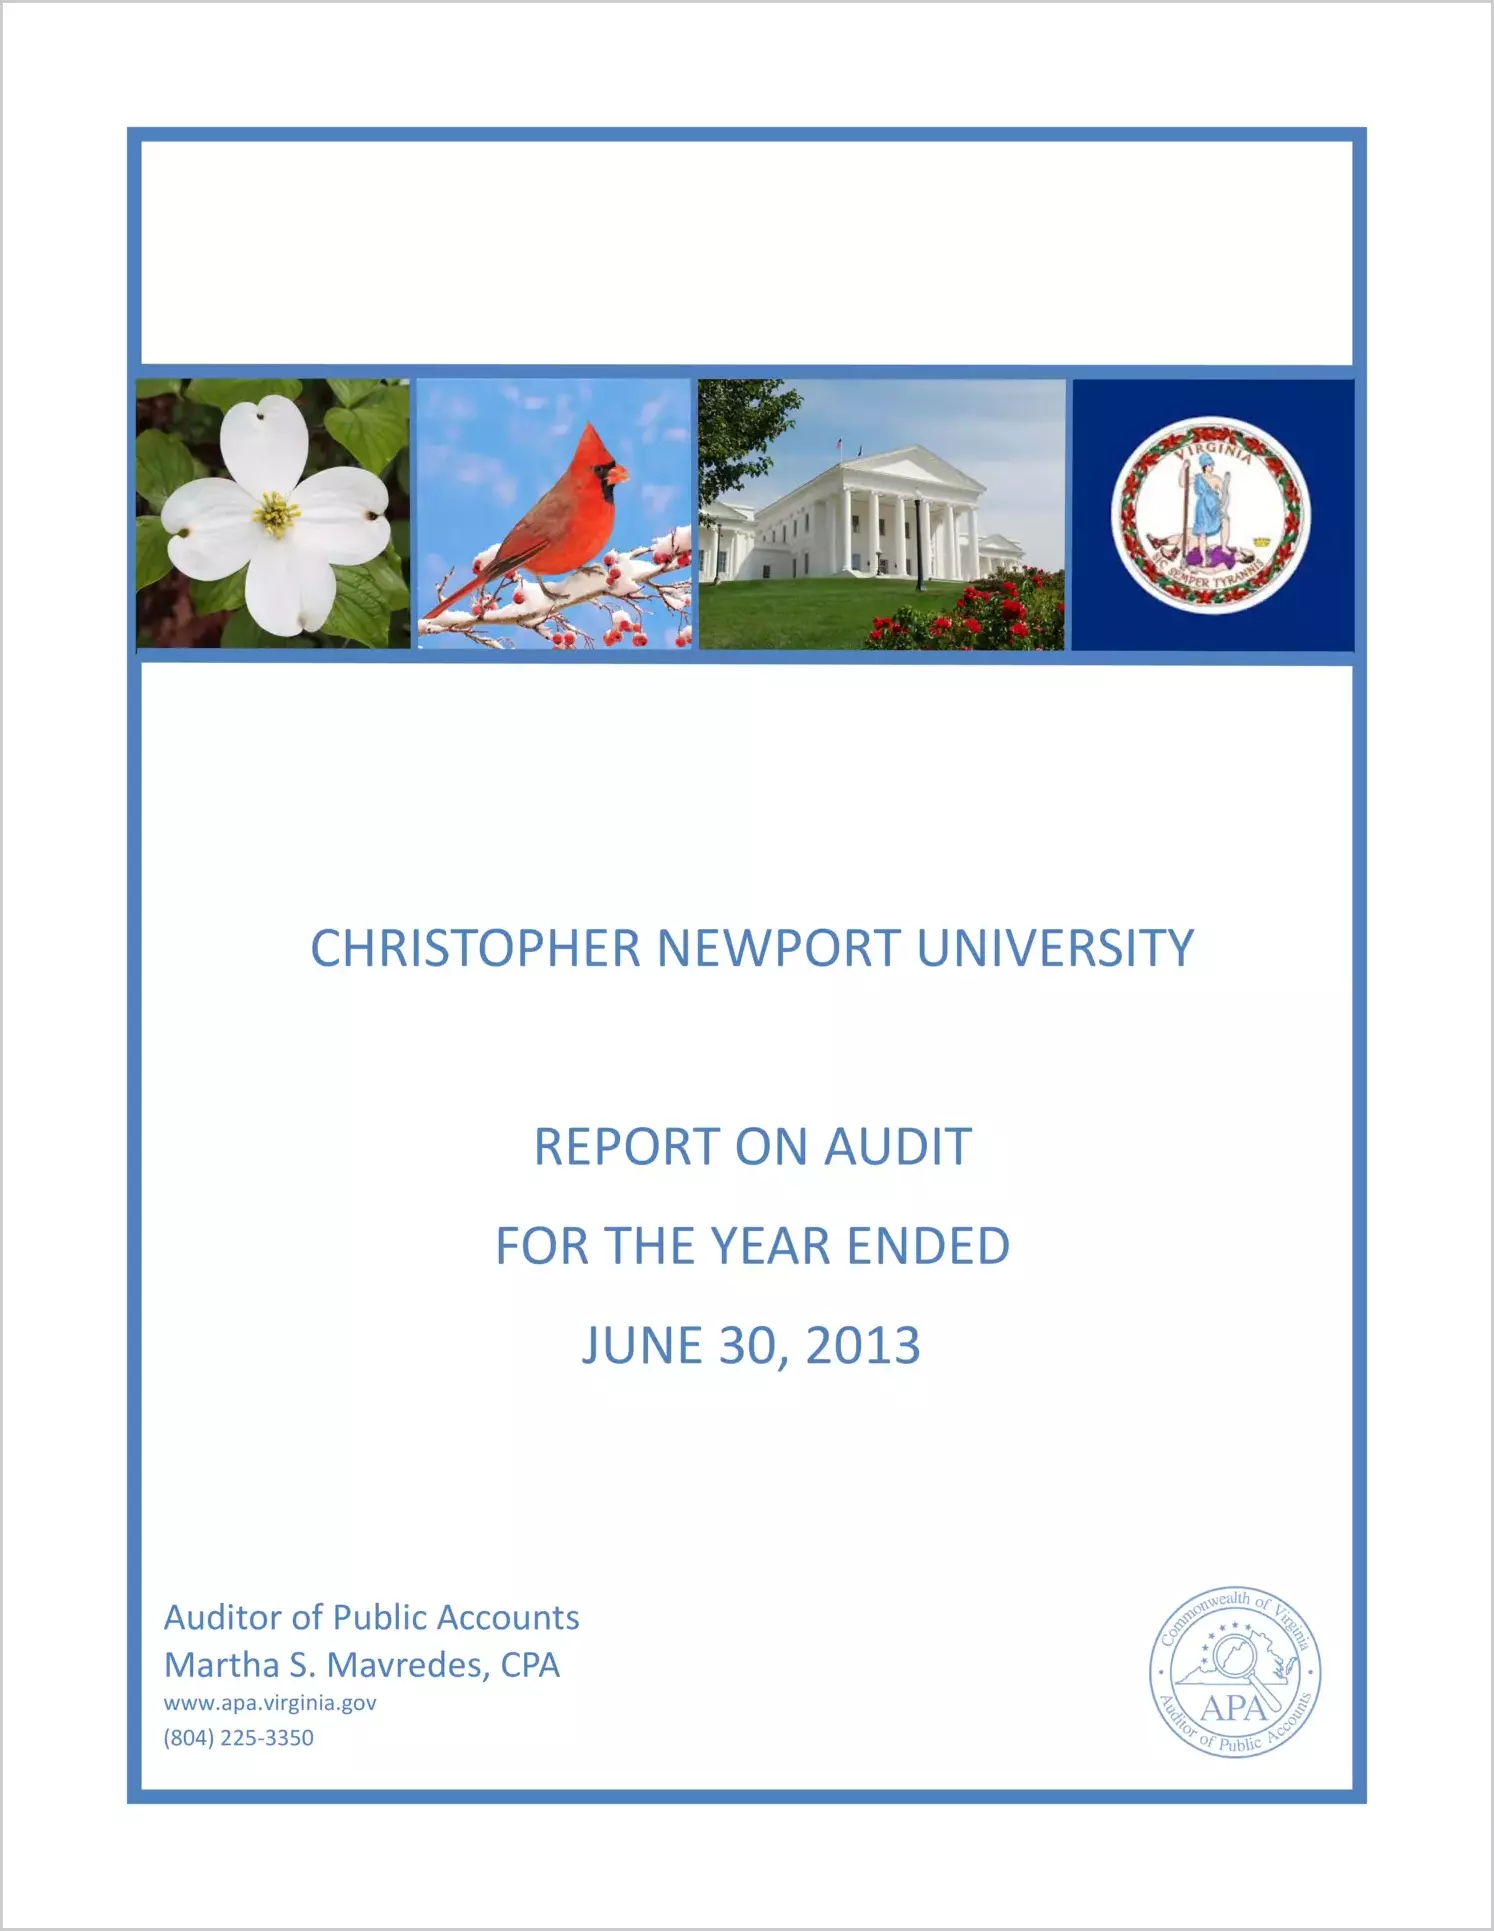 Christopher Newport University for the year ended June 30, 2013